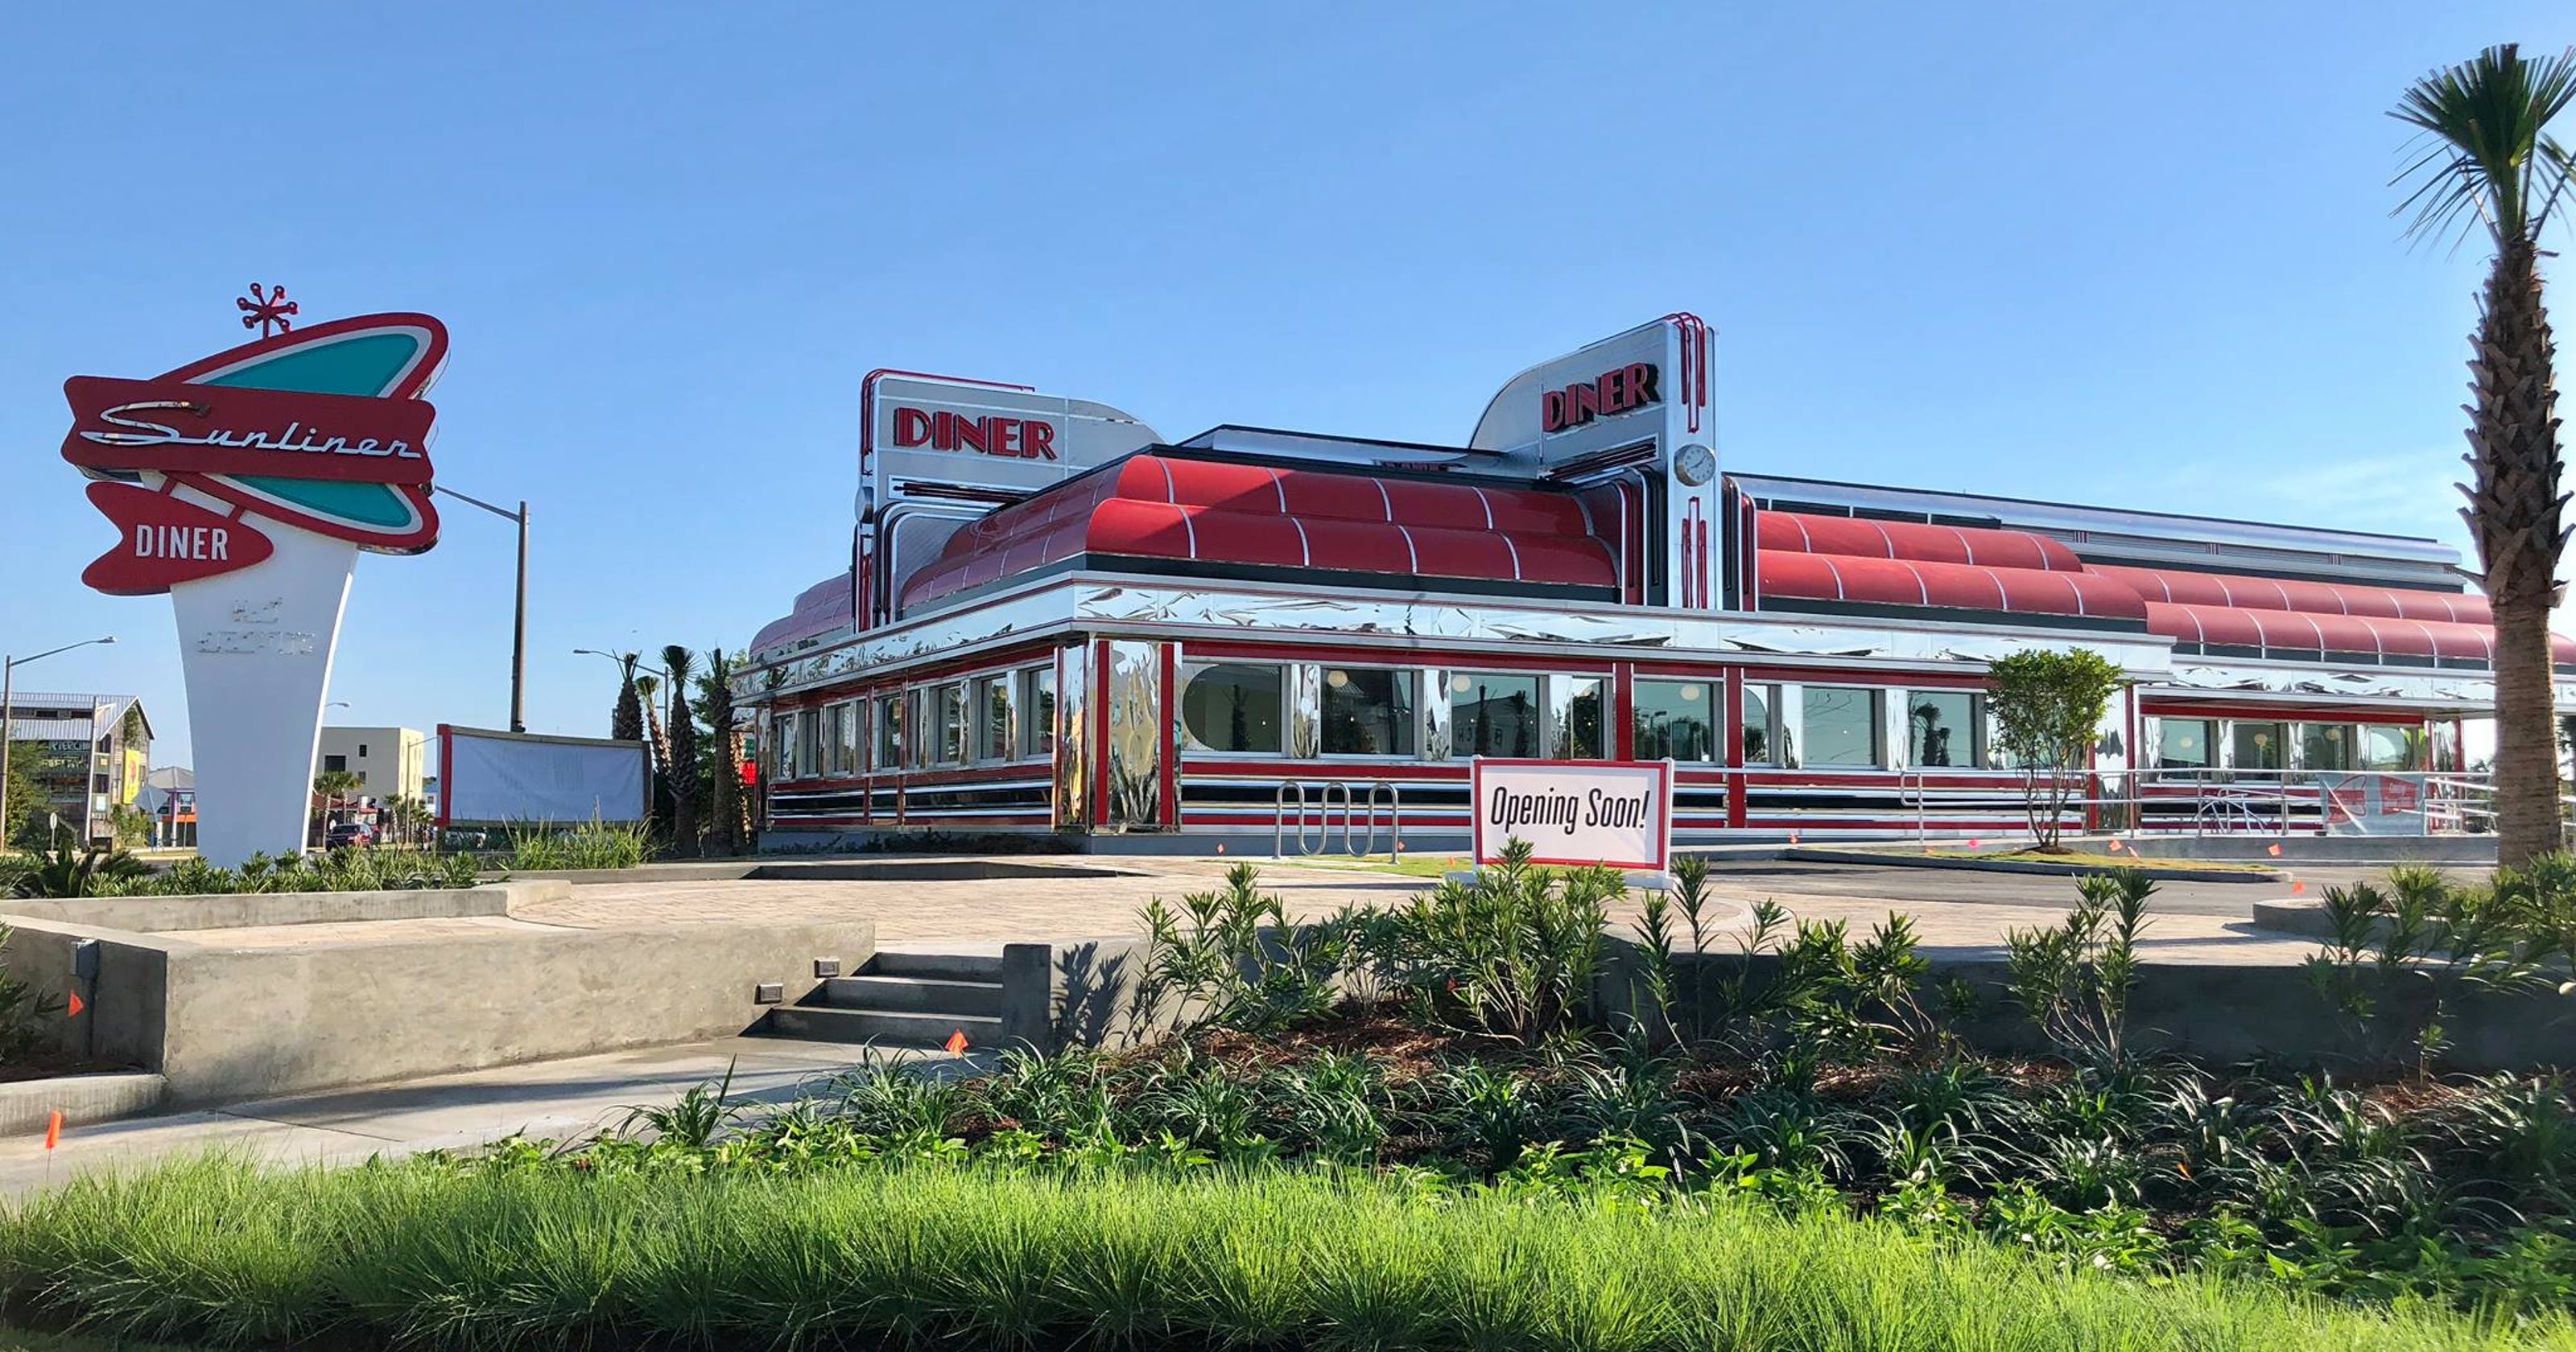 Sunliner Diner and Picnic Beach restaurants open in Gulf Shores